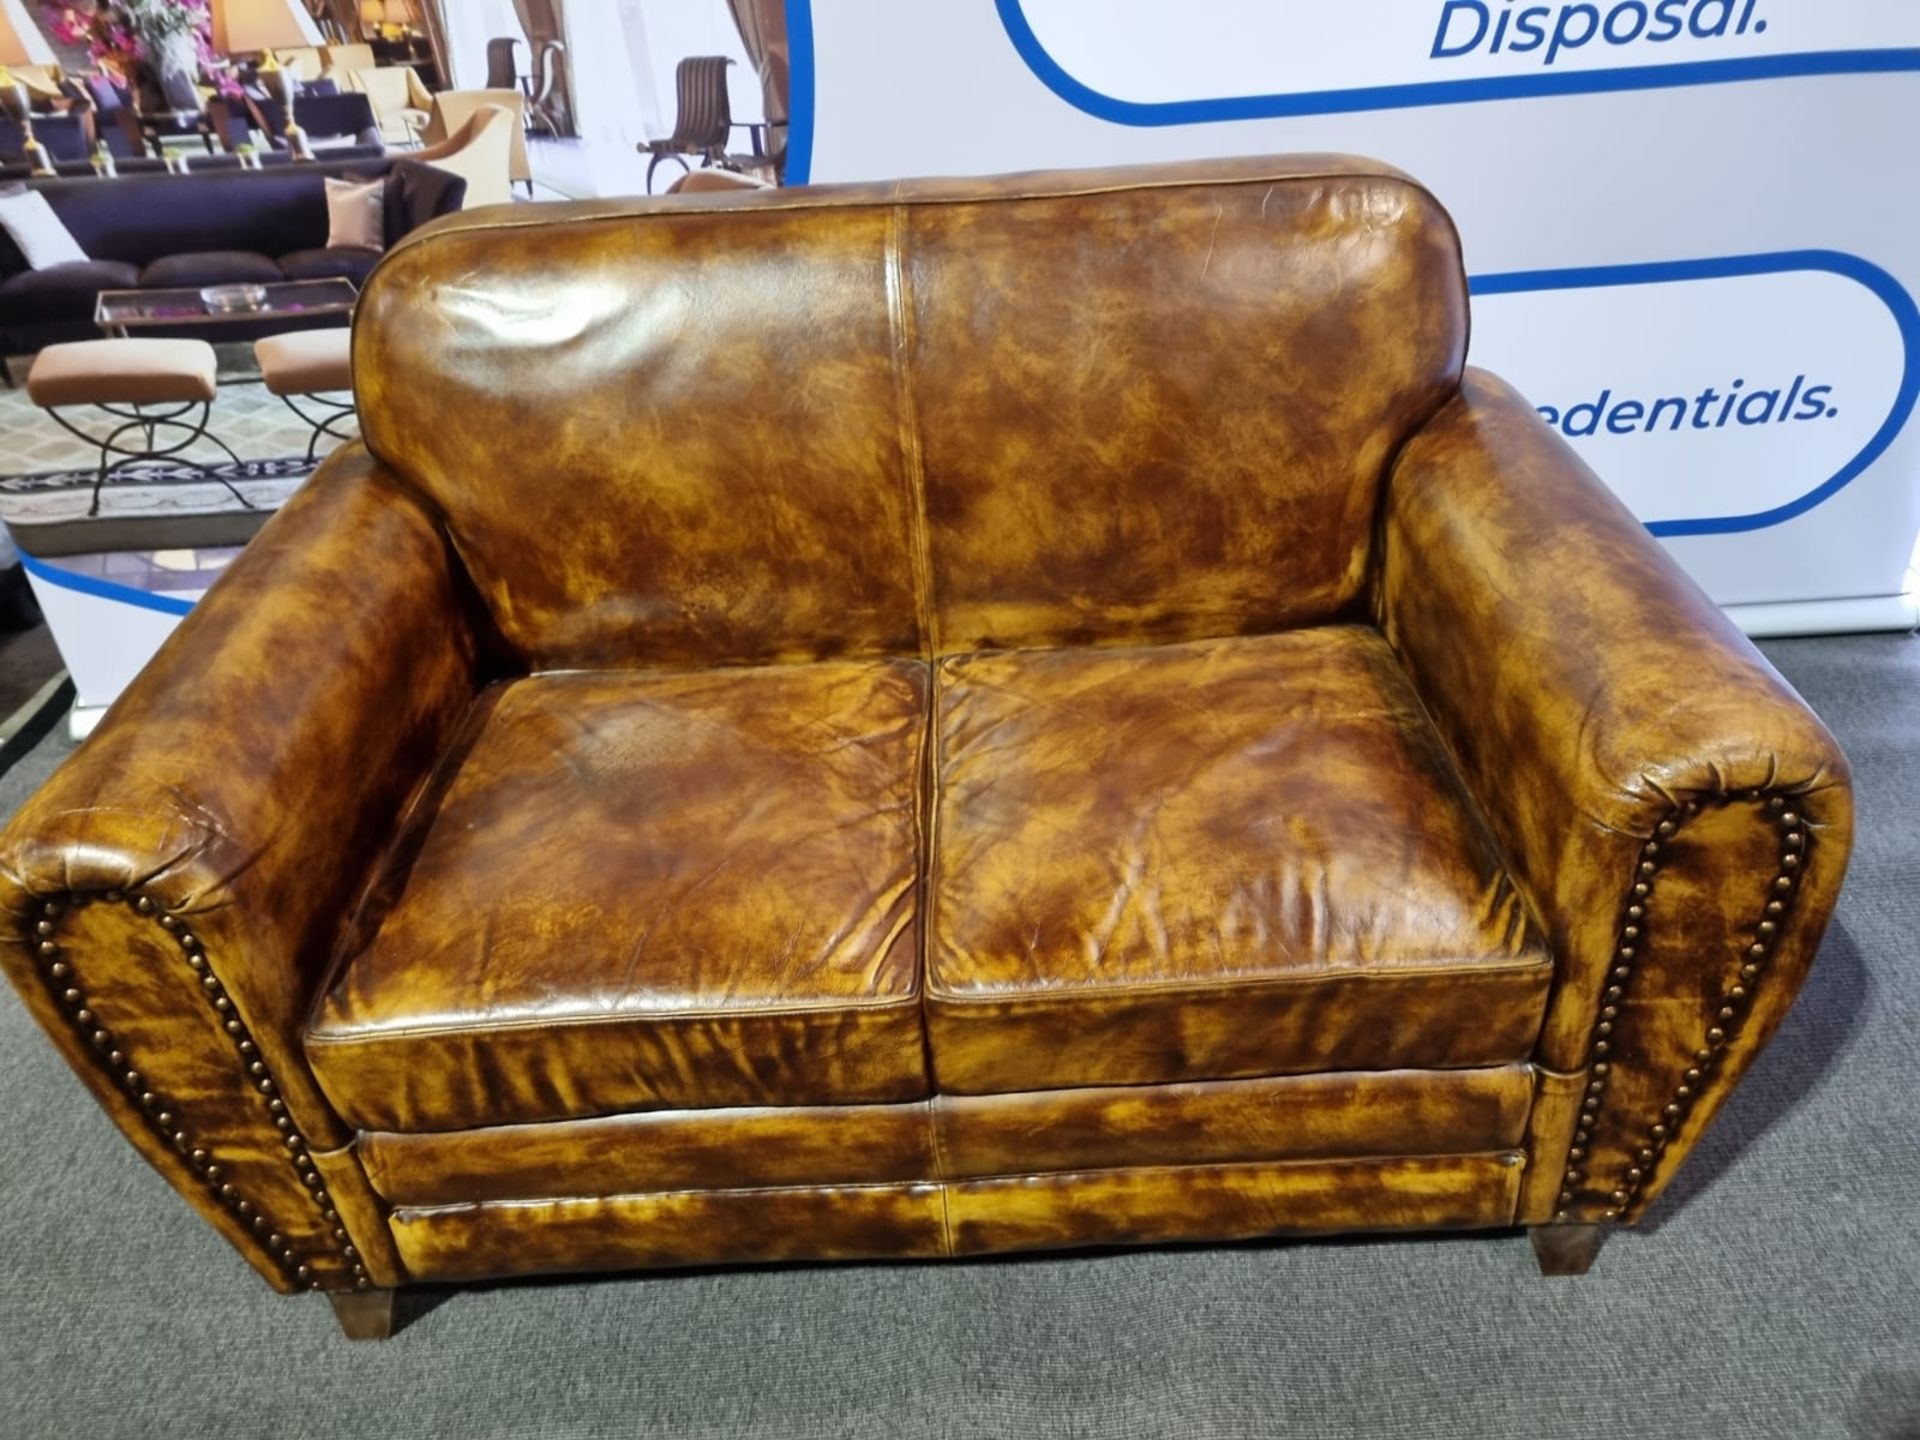 Balmoral Leather Sofa An Instant Classic, The Balmoral Vintage Upholstered In Tabac 100% Leather - Bild 4 aus 6